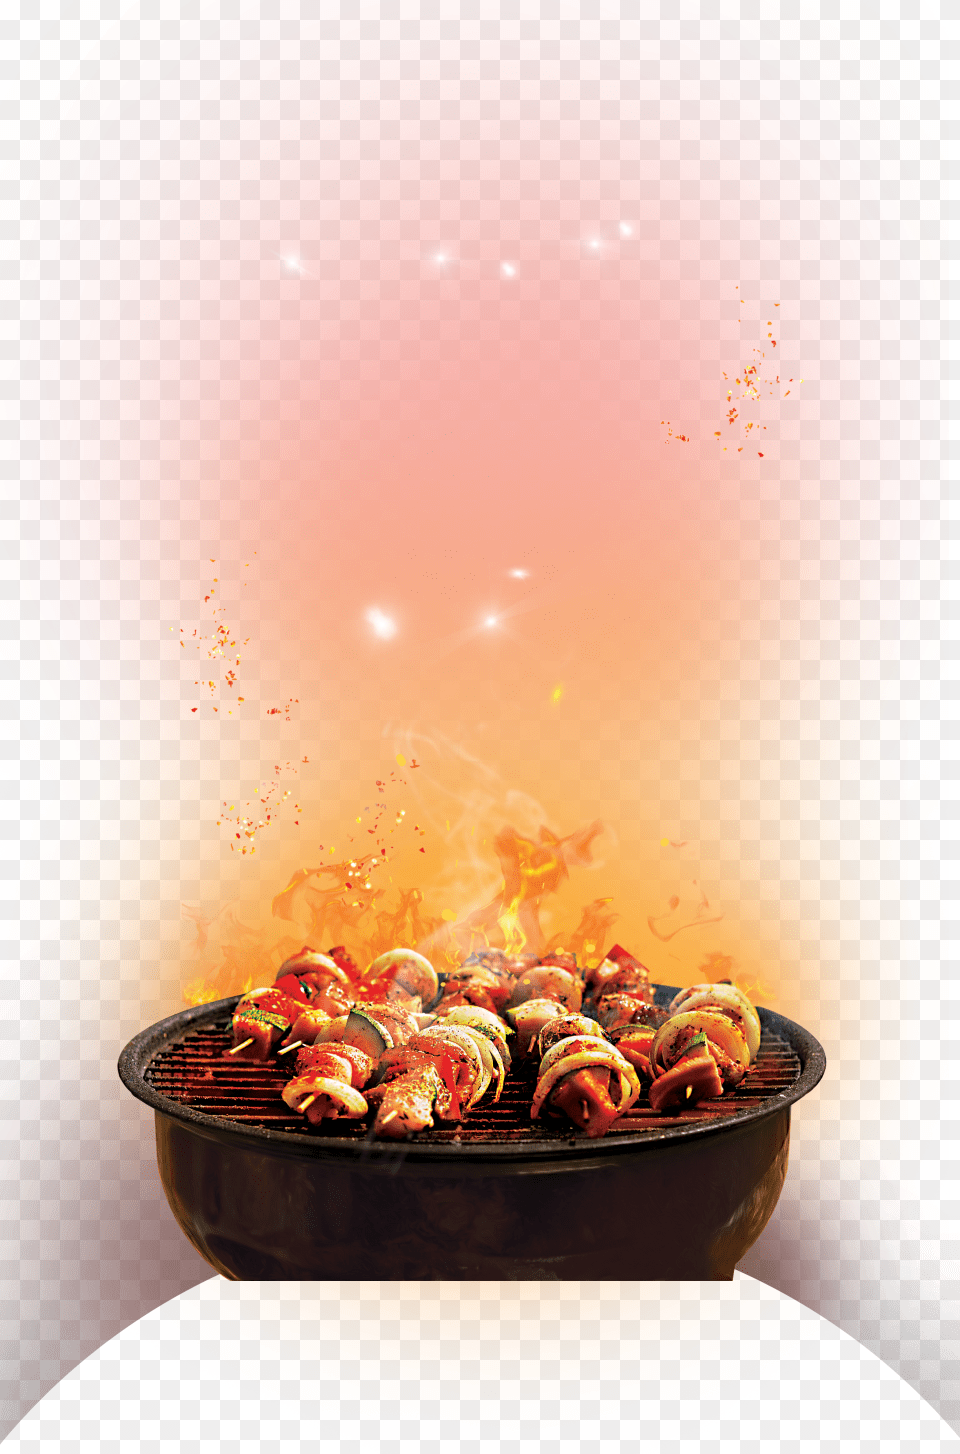 Barbecue Cook On Grill Image Grill, Bbq, Cooking, Food, Grilling Free Png Download